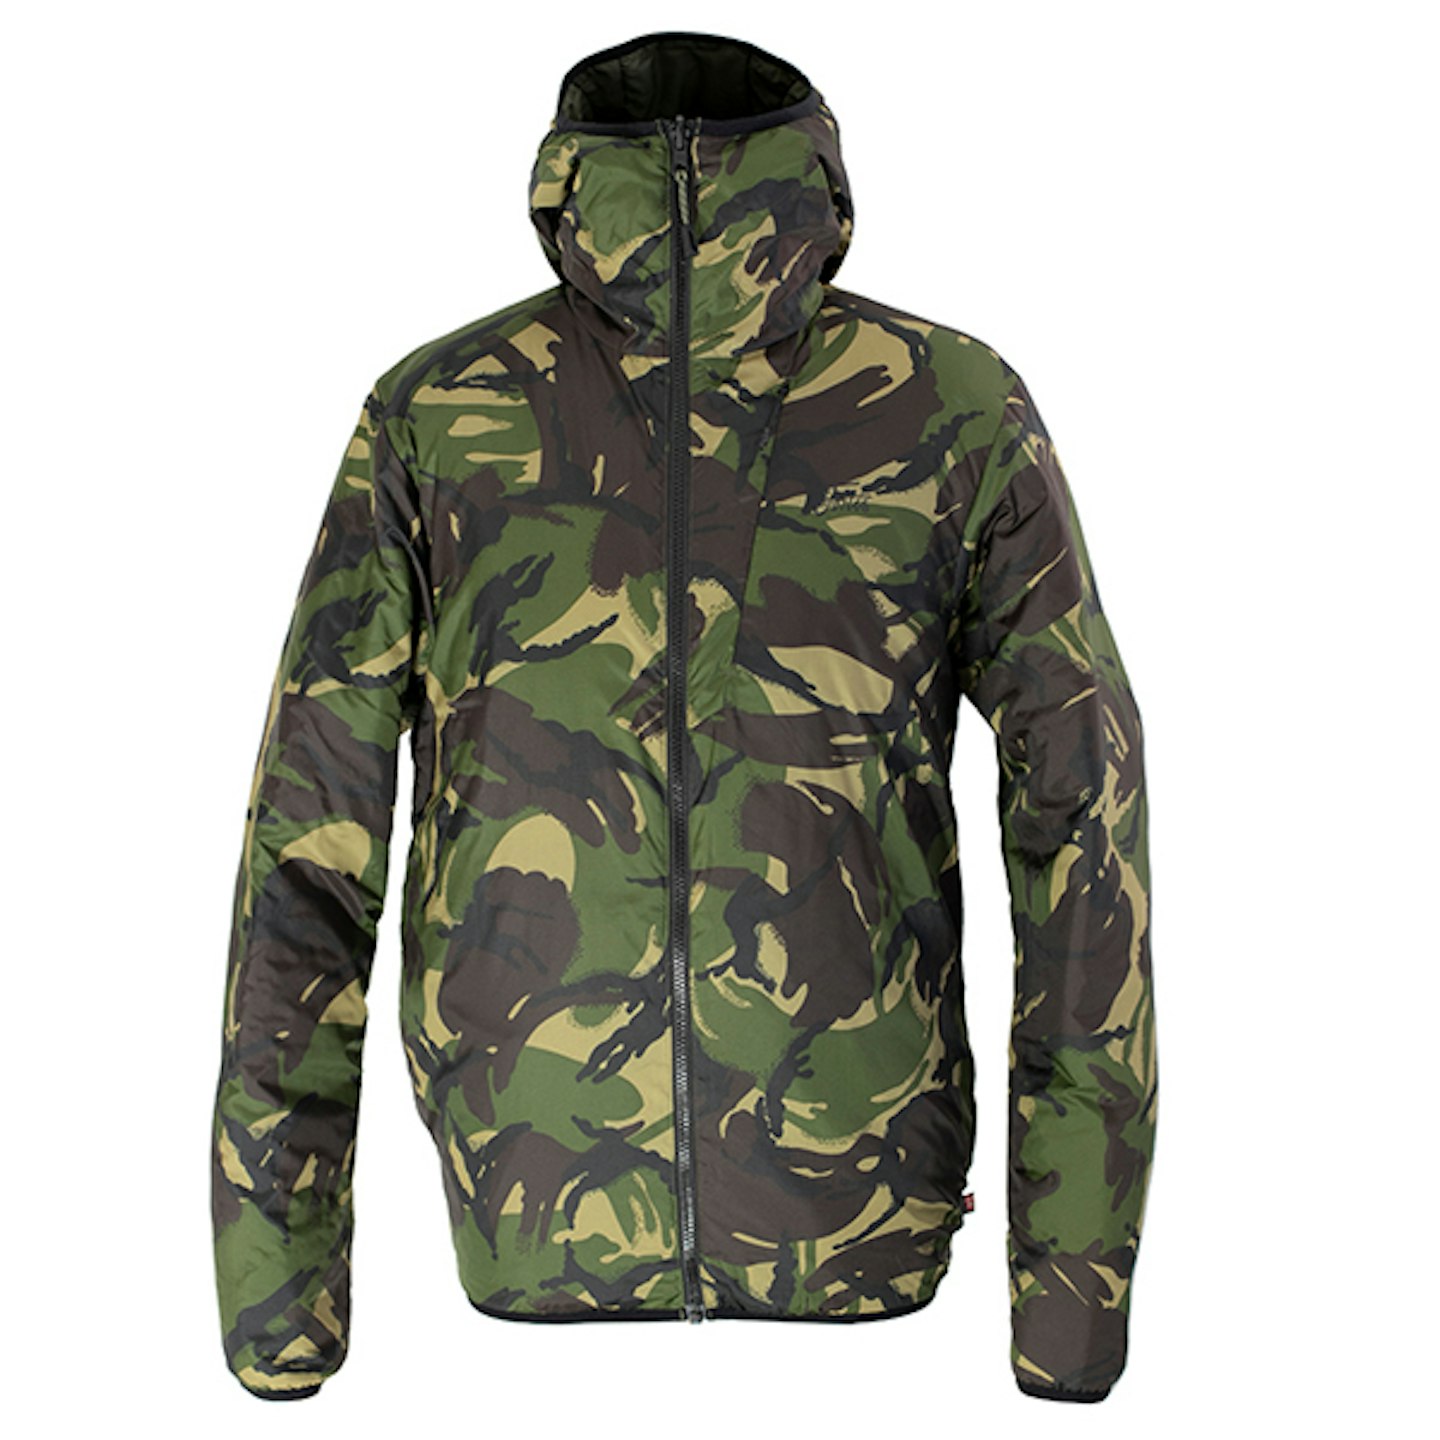 The best winter fishing jackets | Angling Times